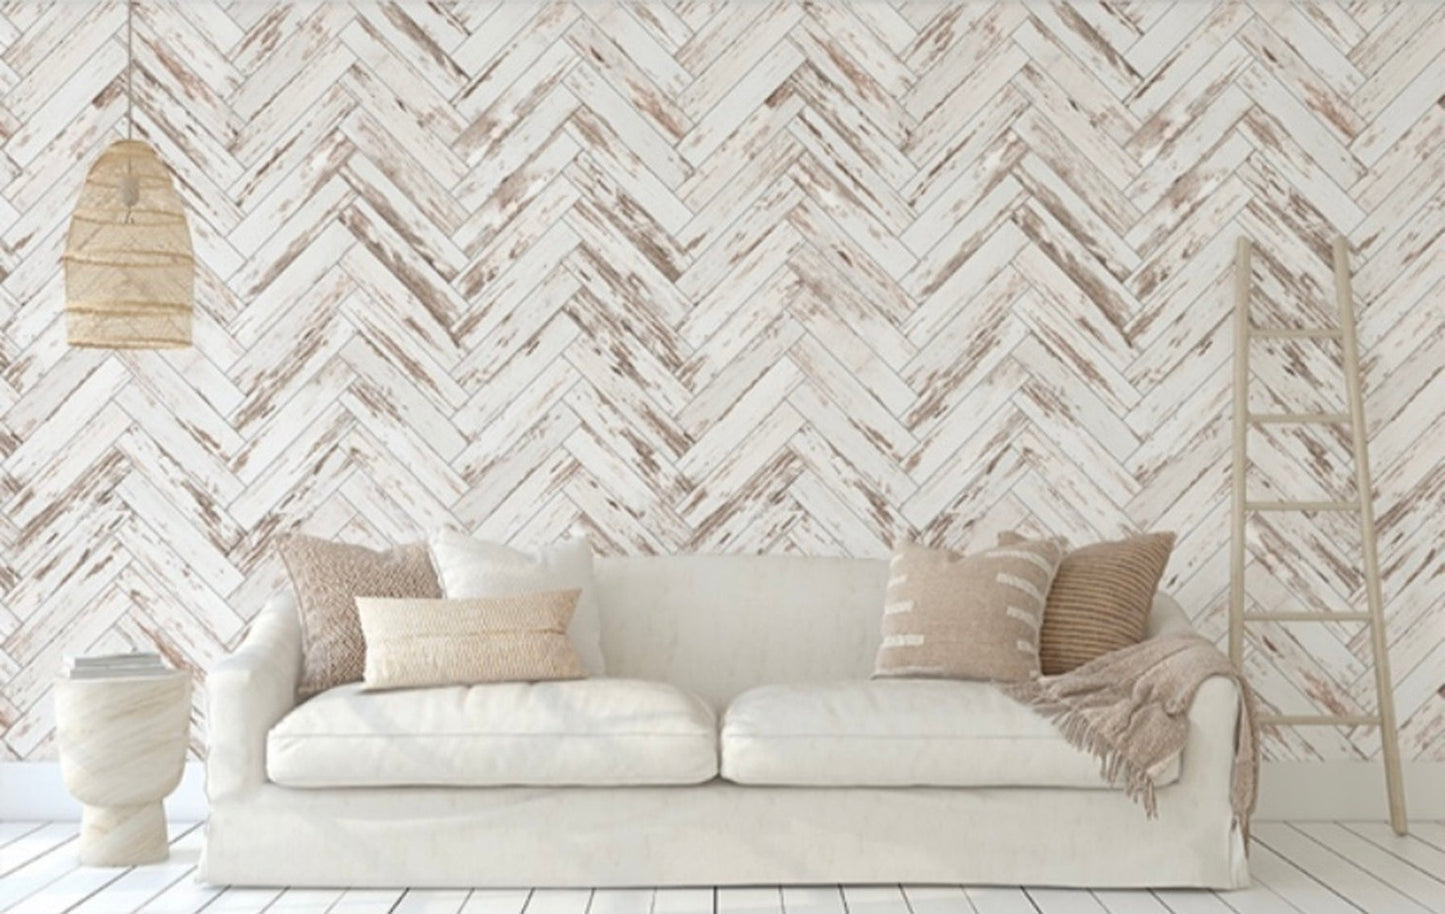 distressed wooden parquetry removable wallpaper